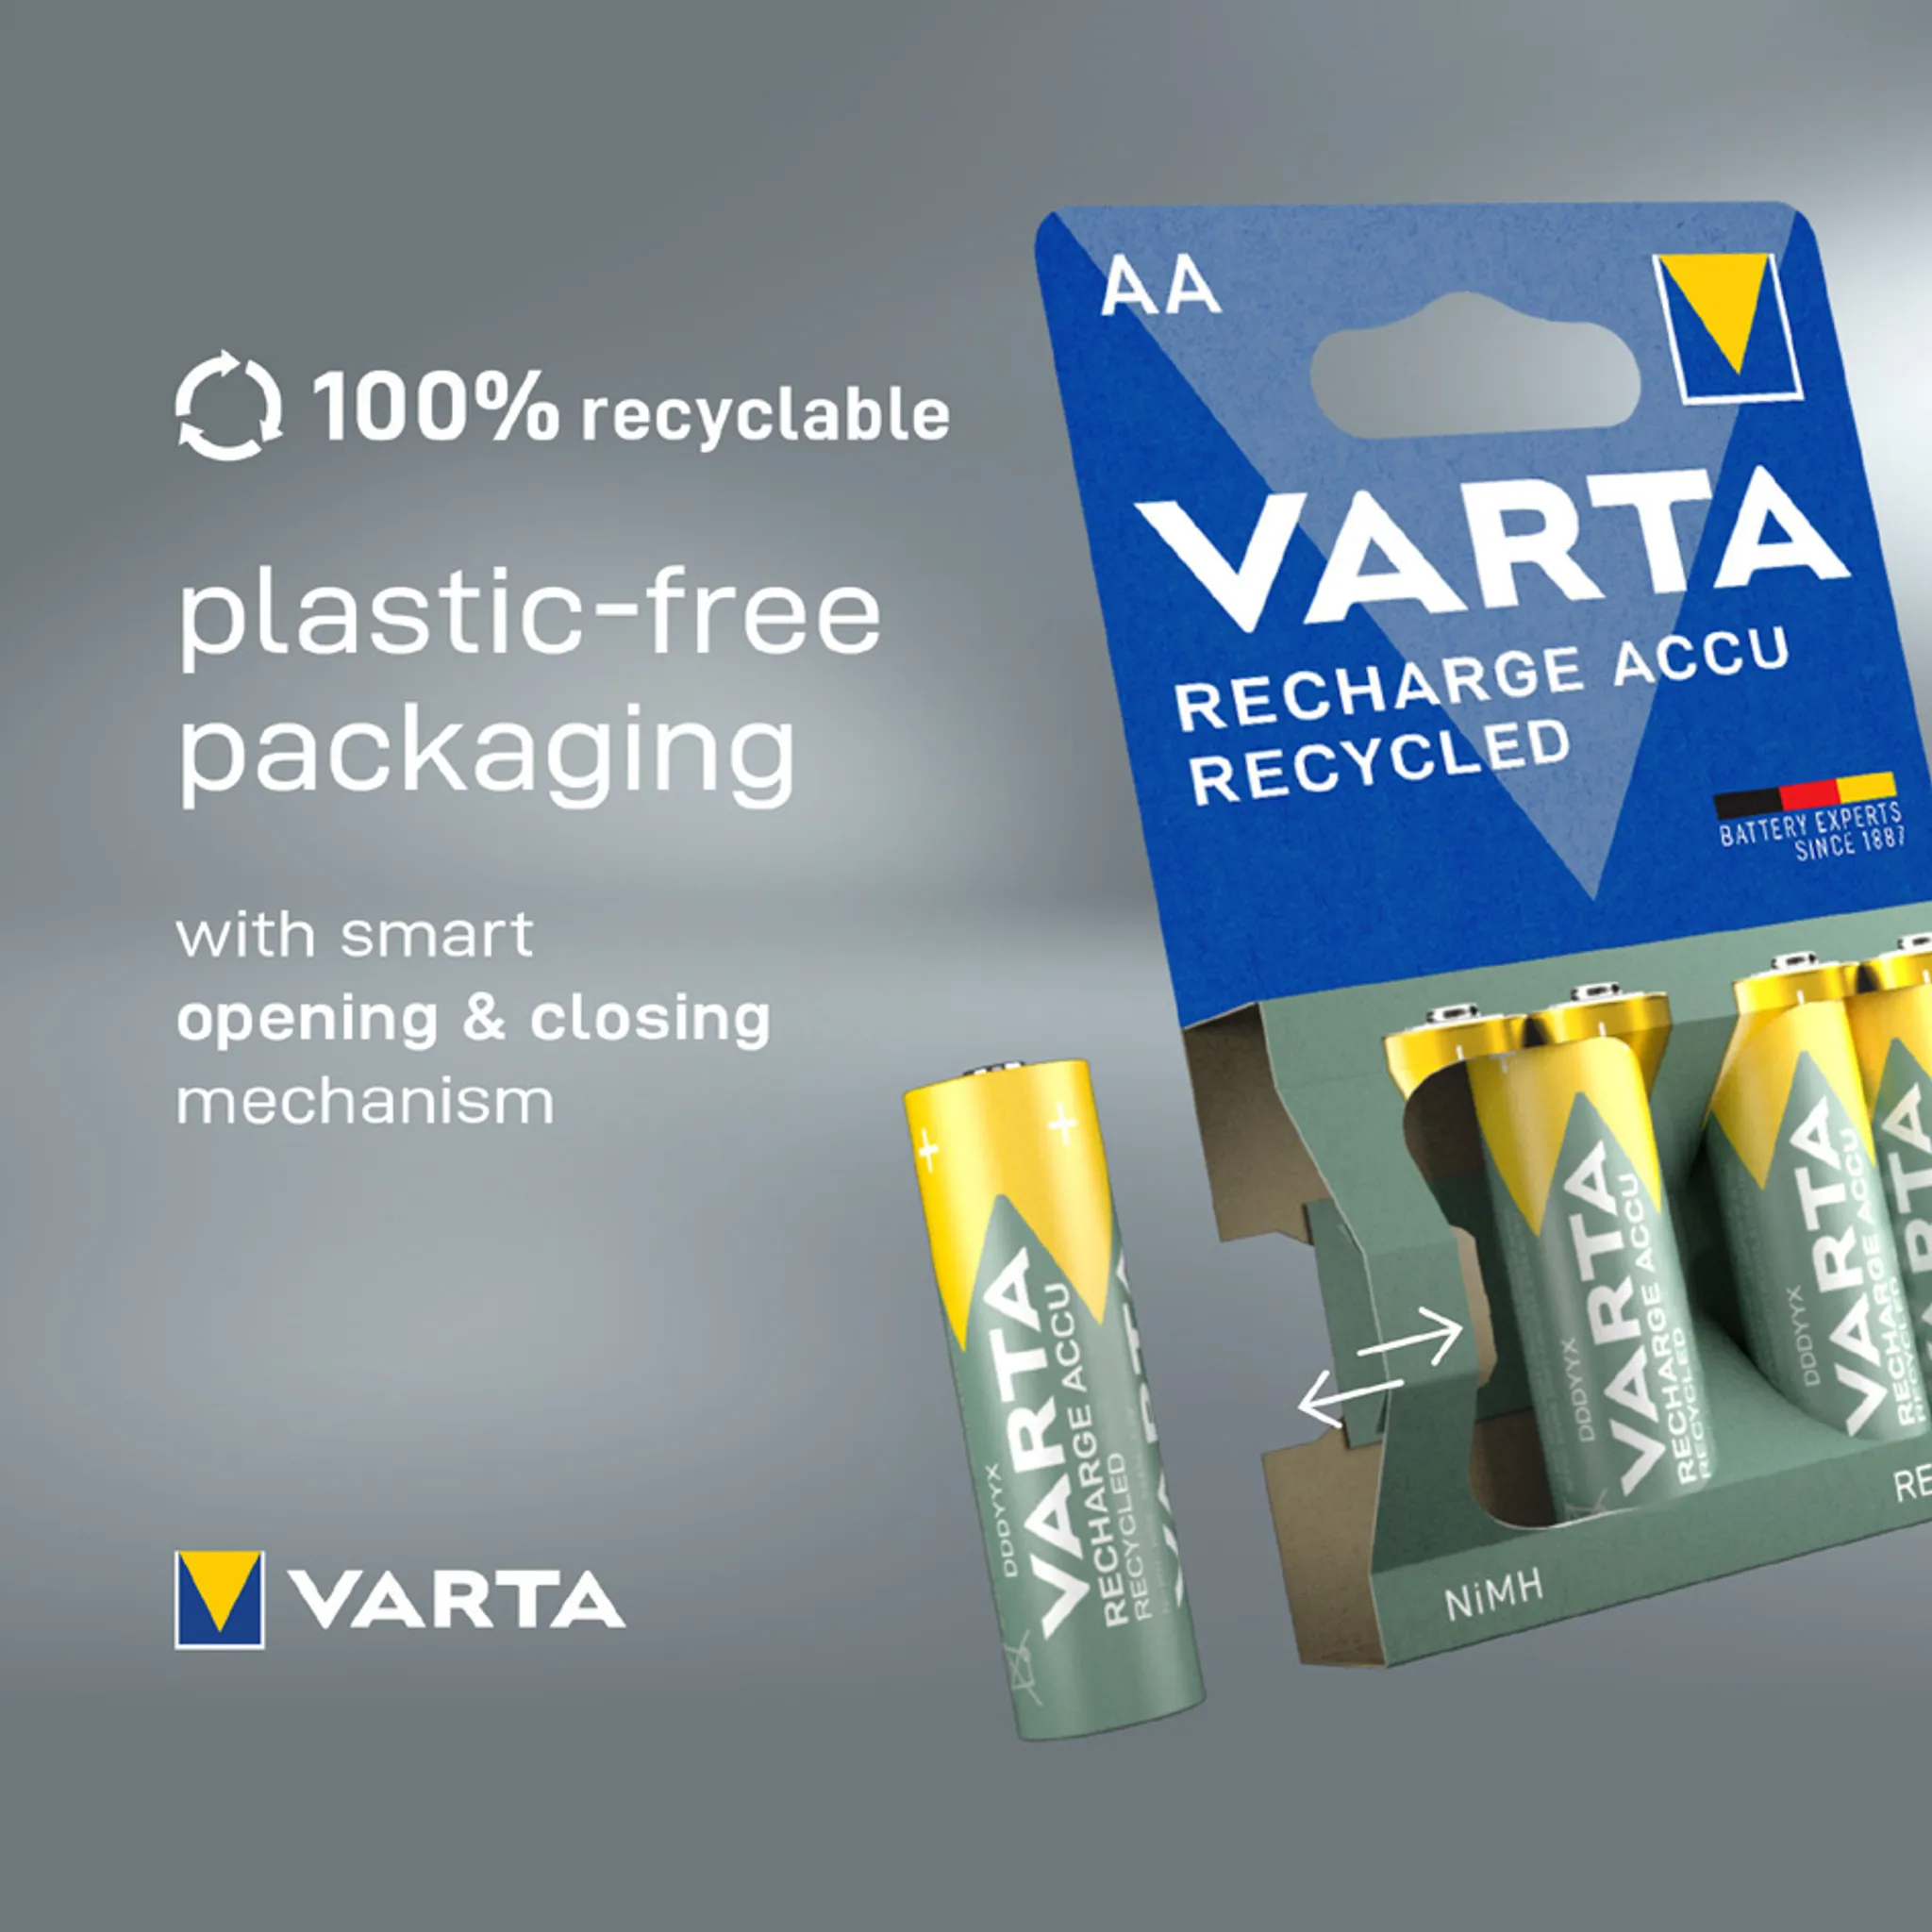 Varta Recharge Accu 56816 - Recycled Batterie